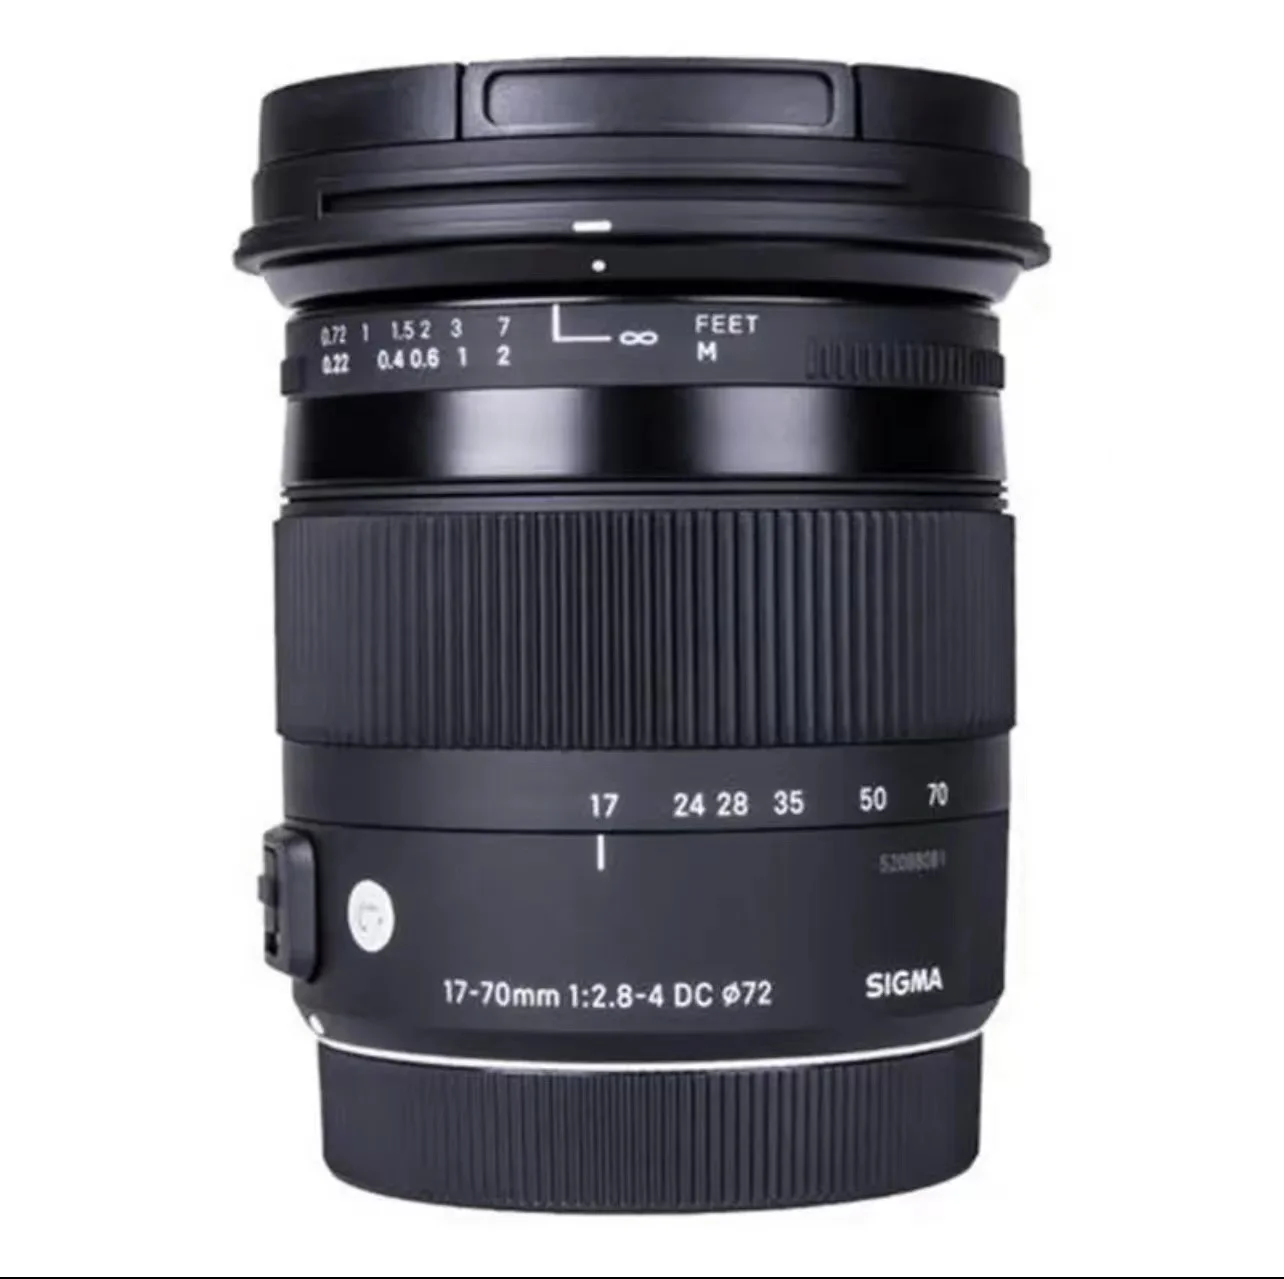 Featured Products digital camera half frame lens For SIGMA 17 70mm F2.8 4 DC Macro os HSM zoom lens (1600527737714)